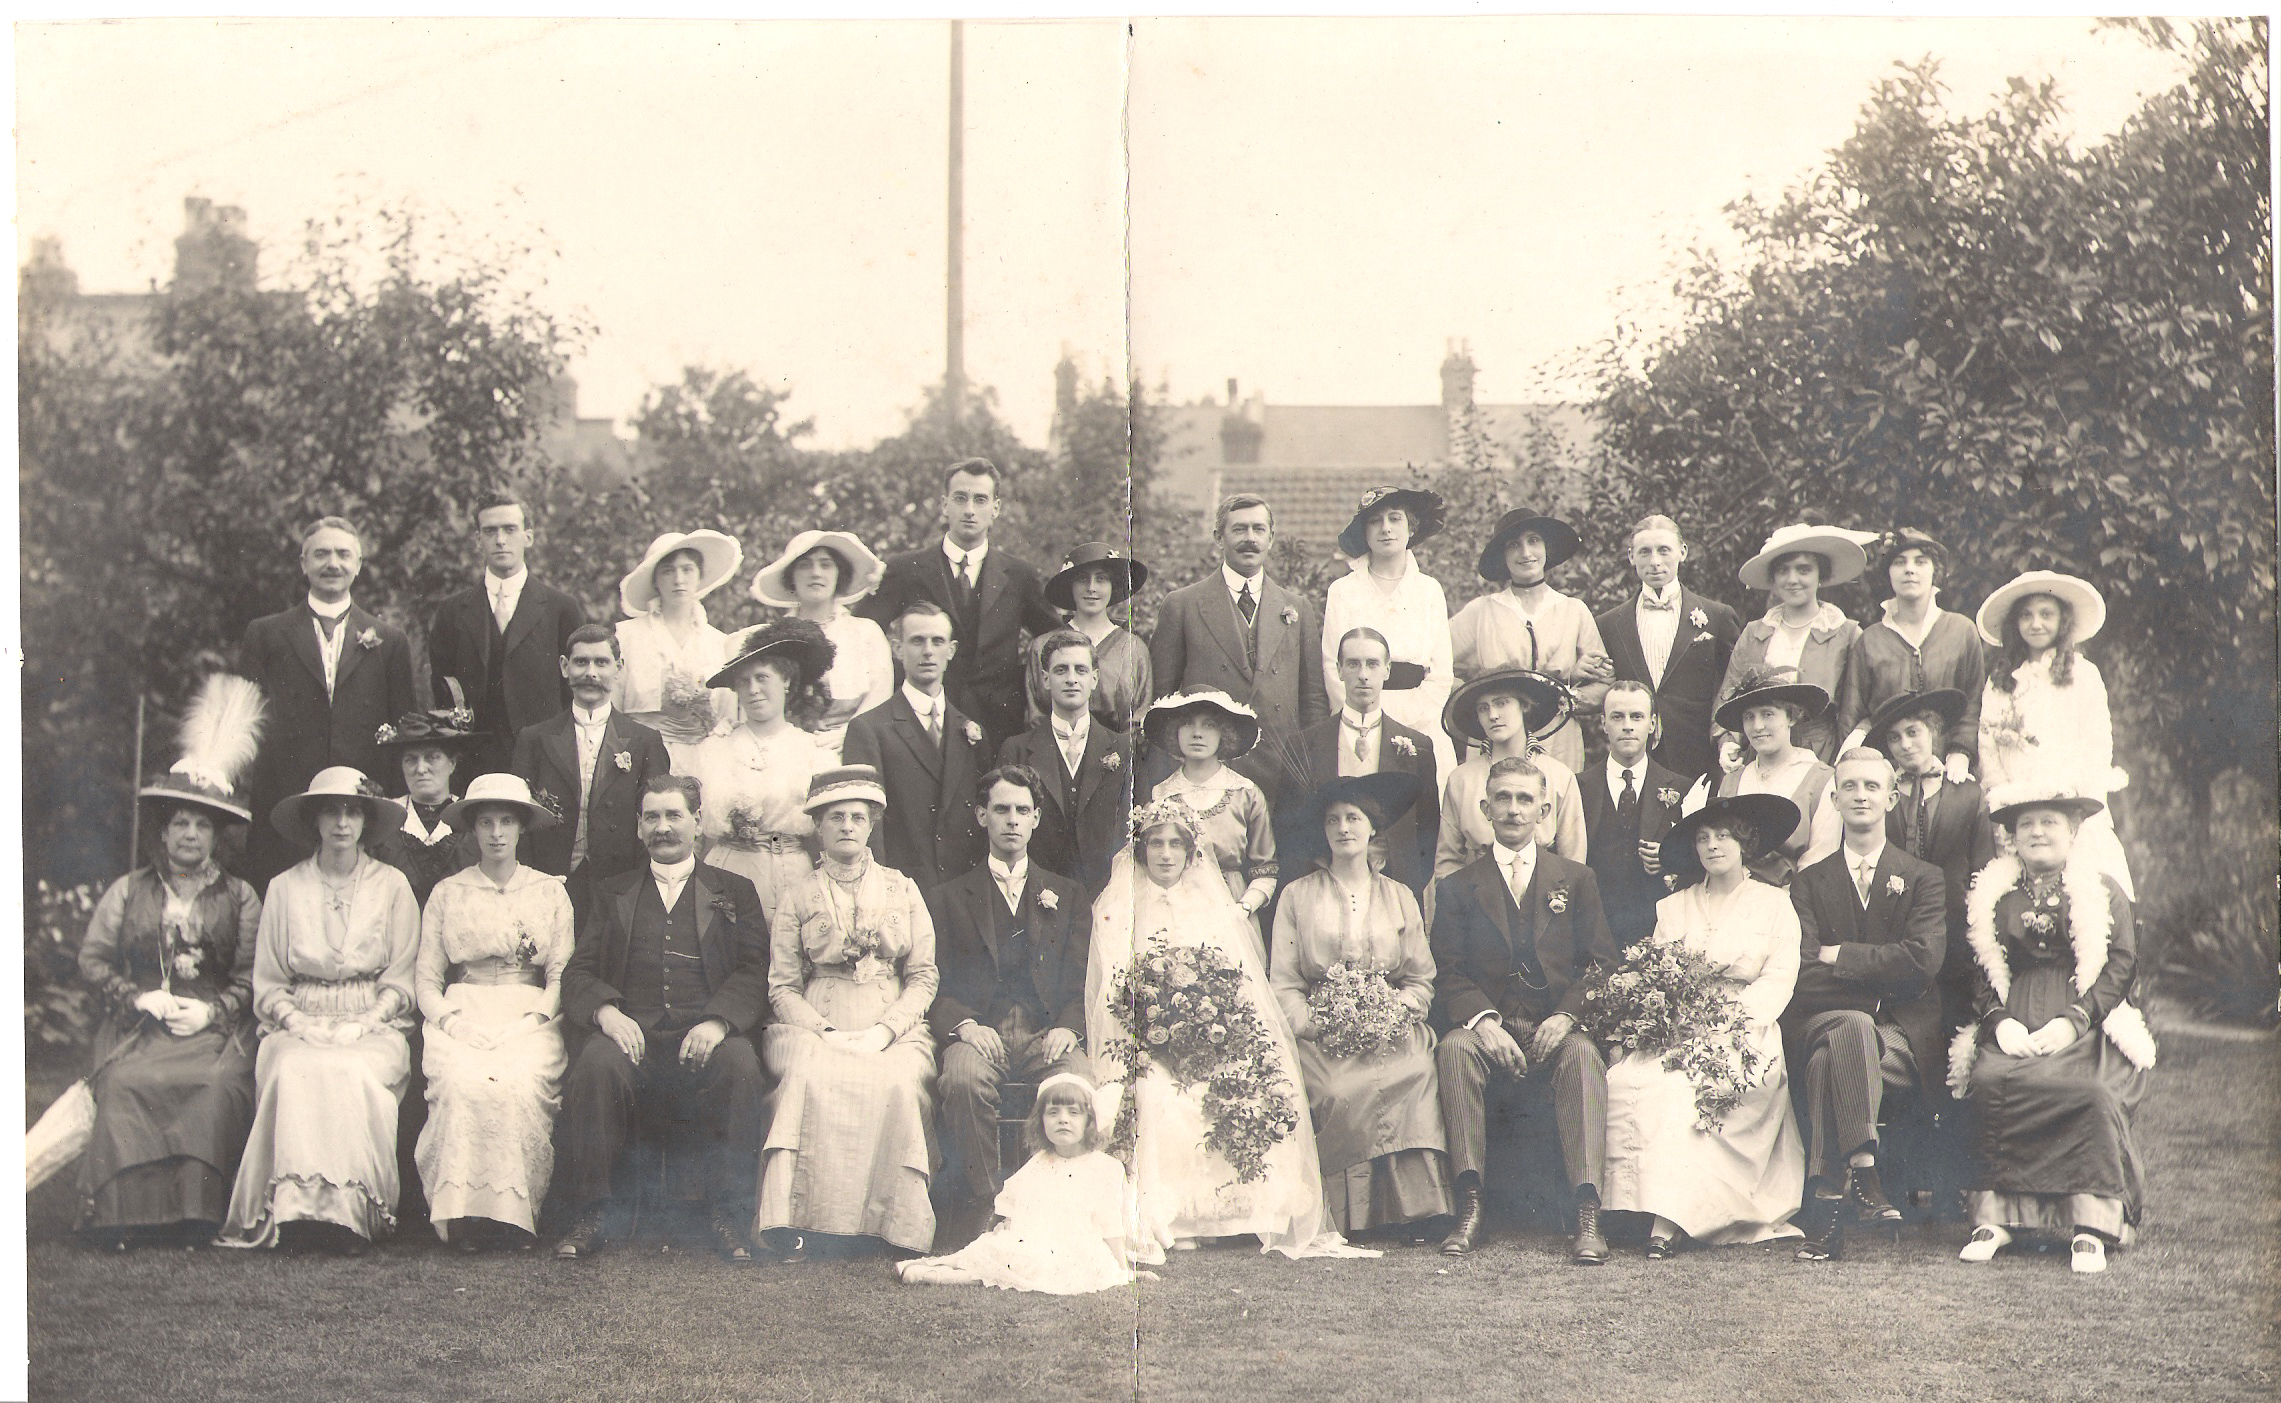 Wedding of Charles Howard SANDELL, 28th August 1915. Front row left to right: u/k, Gertrude SANDELL, Ida MALCOLM, Charles Joseph SANDELL, Edith Emma SANDELL, Charles SANDELL, Nellie May RENVOIZE, Mr and Mrs RENVOIZE, 2nd row left to right, William MALCOLM, 4th from left, Reginald Pagett SANDELL, back row, 2nd left, William TAYLOR, who married Gertrude SANDELL, miss two then Donald and Edith BEARMAN